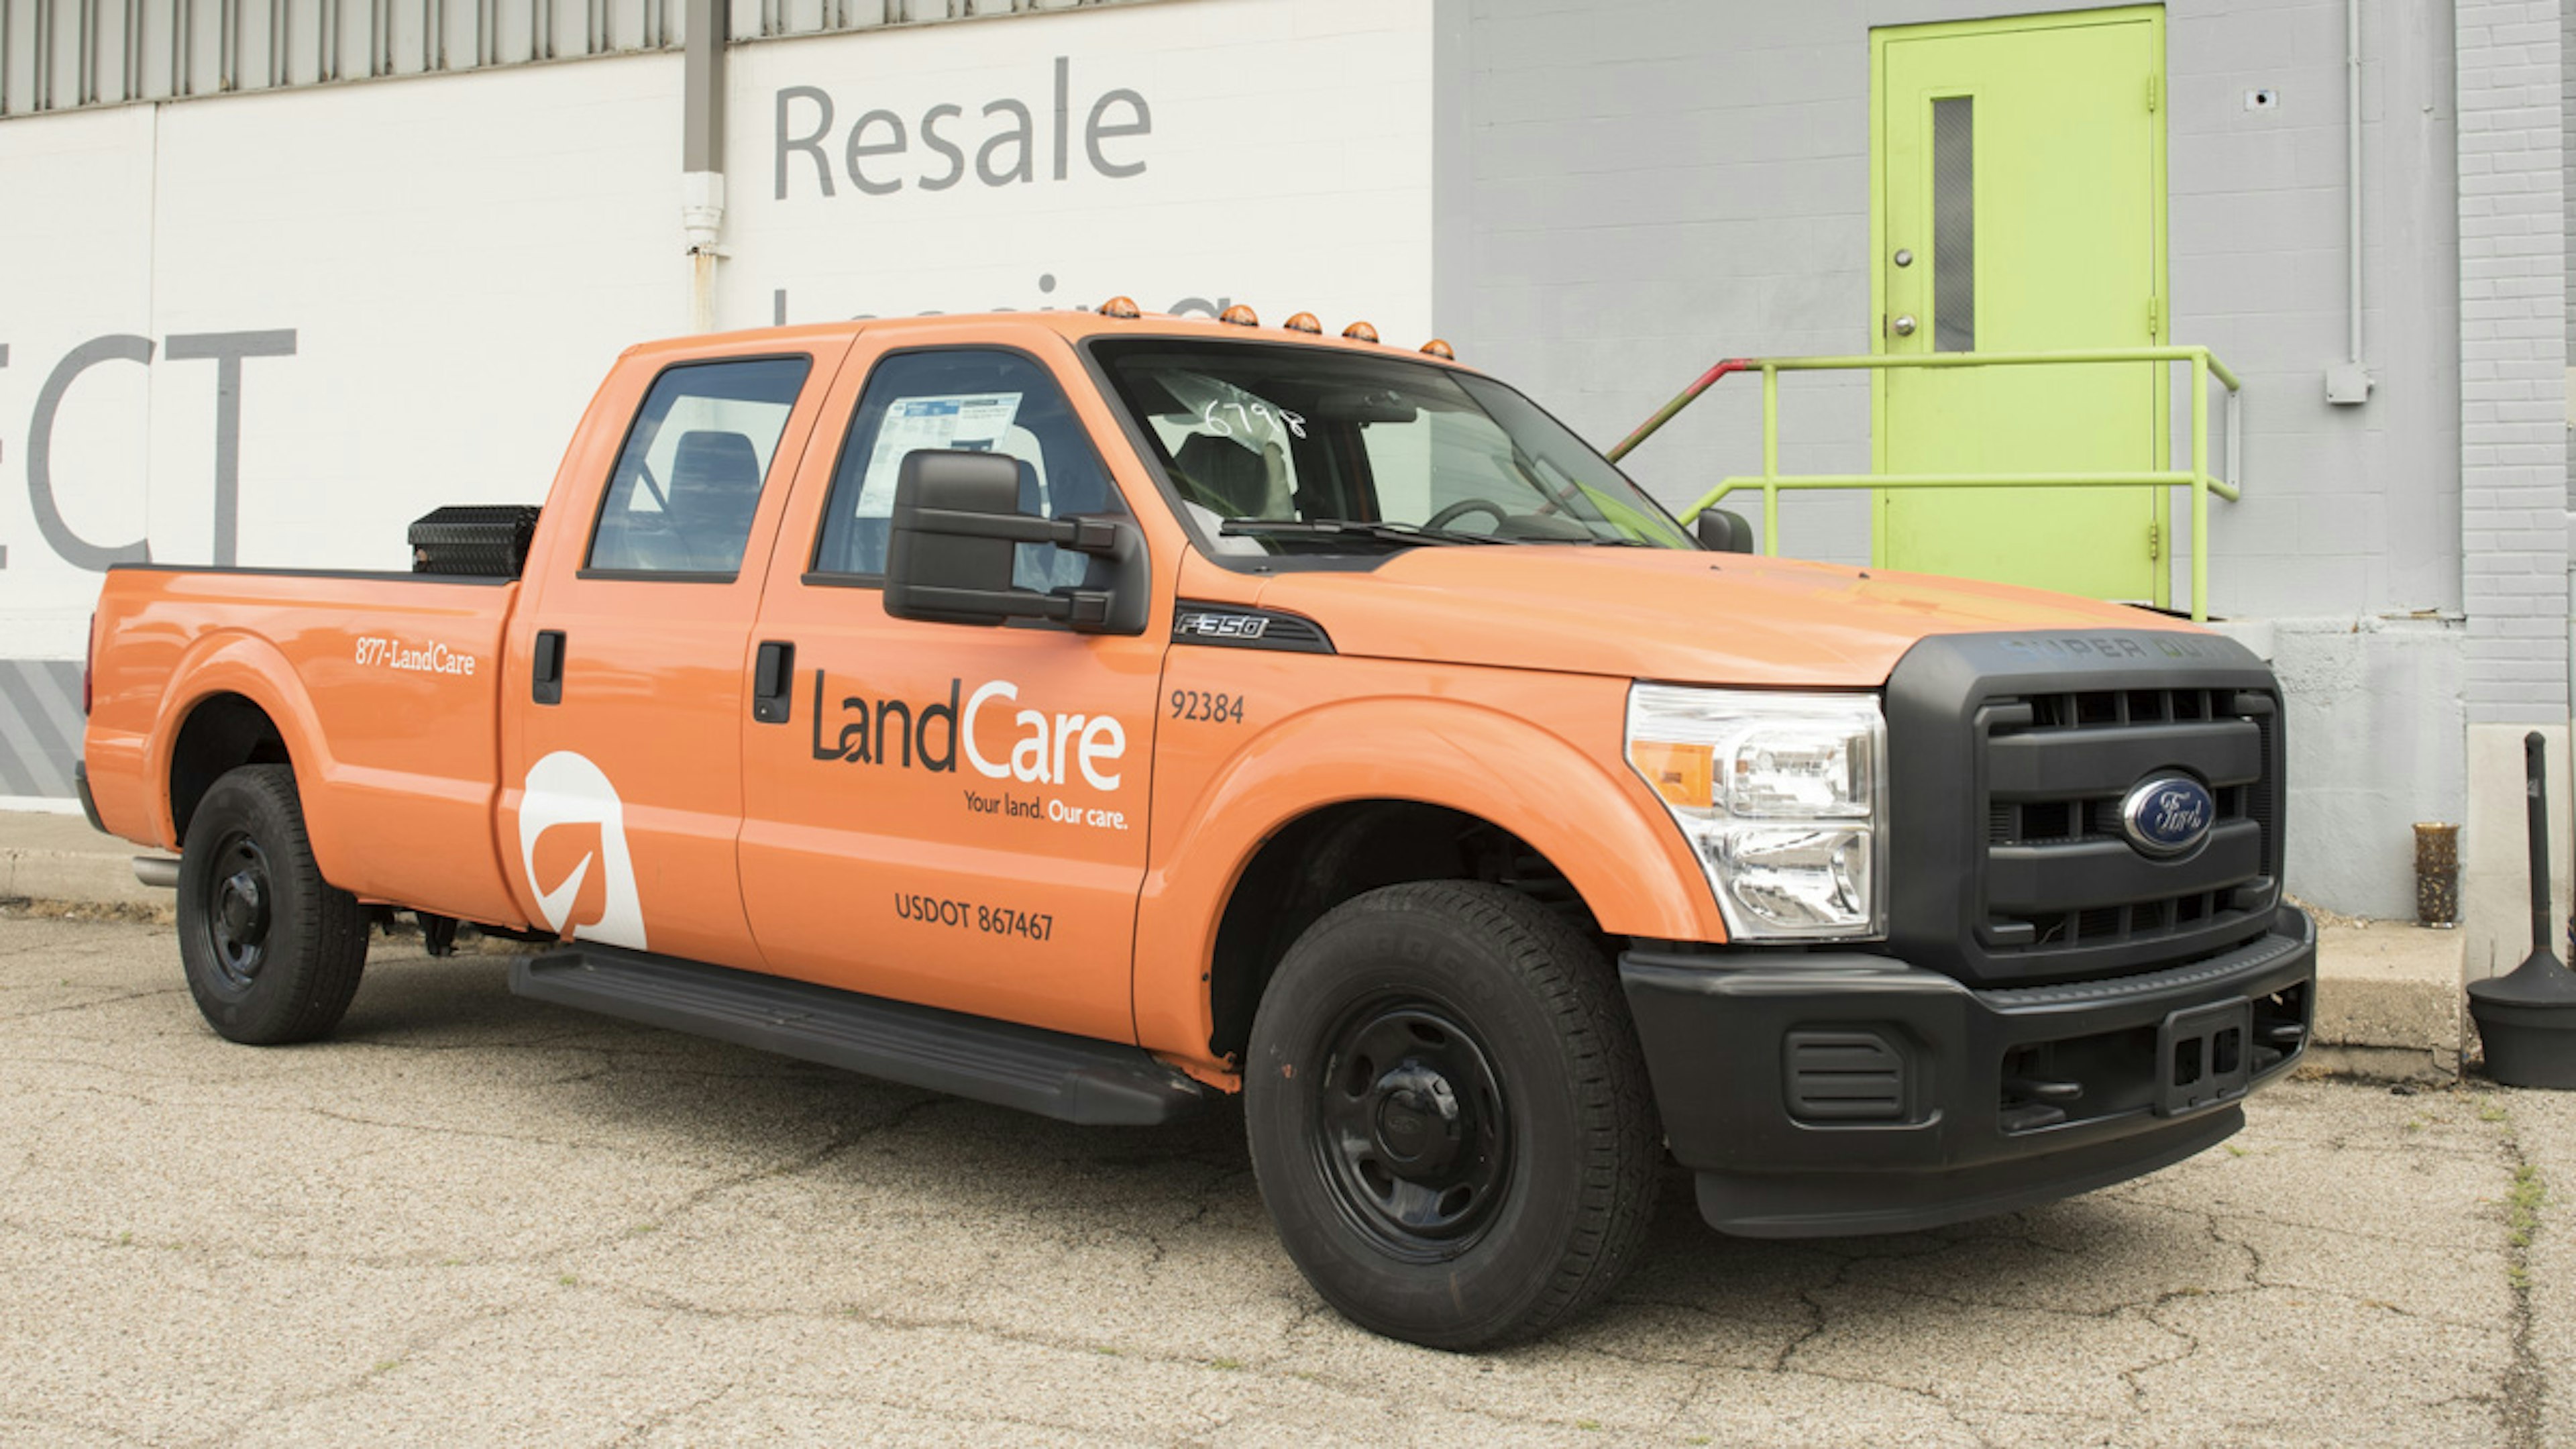 Branded truck with custom wrap